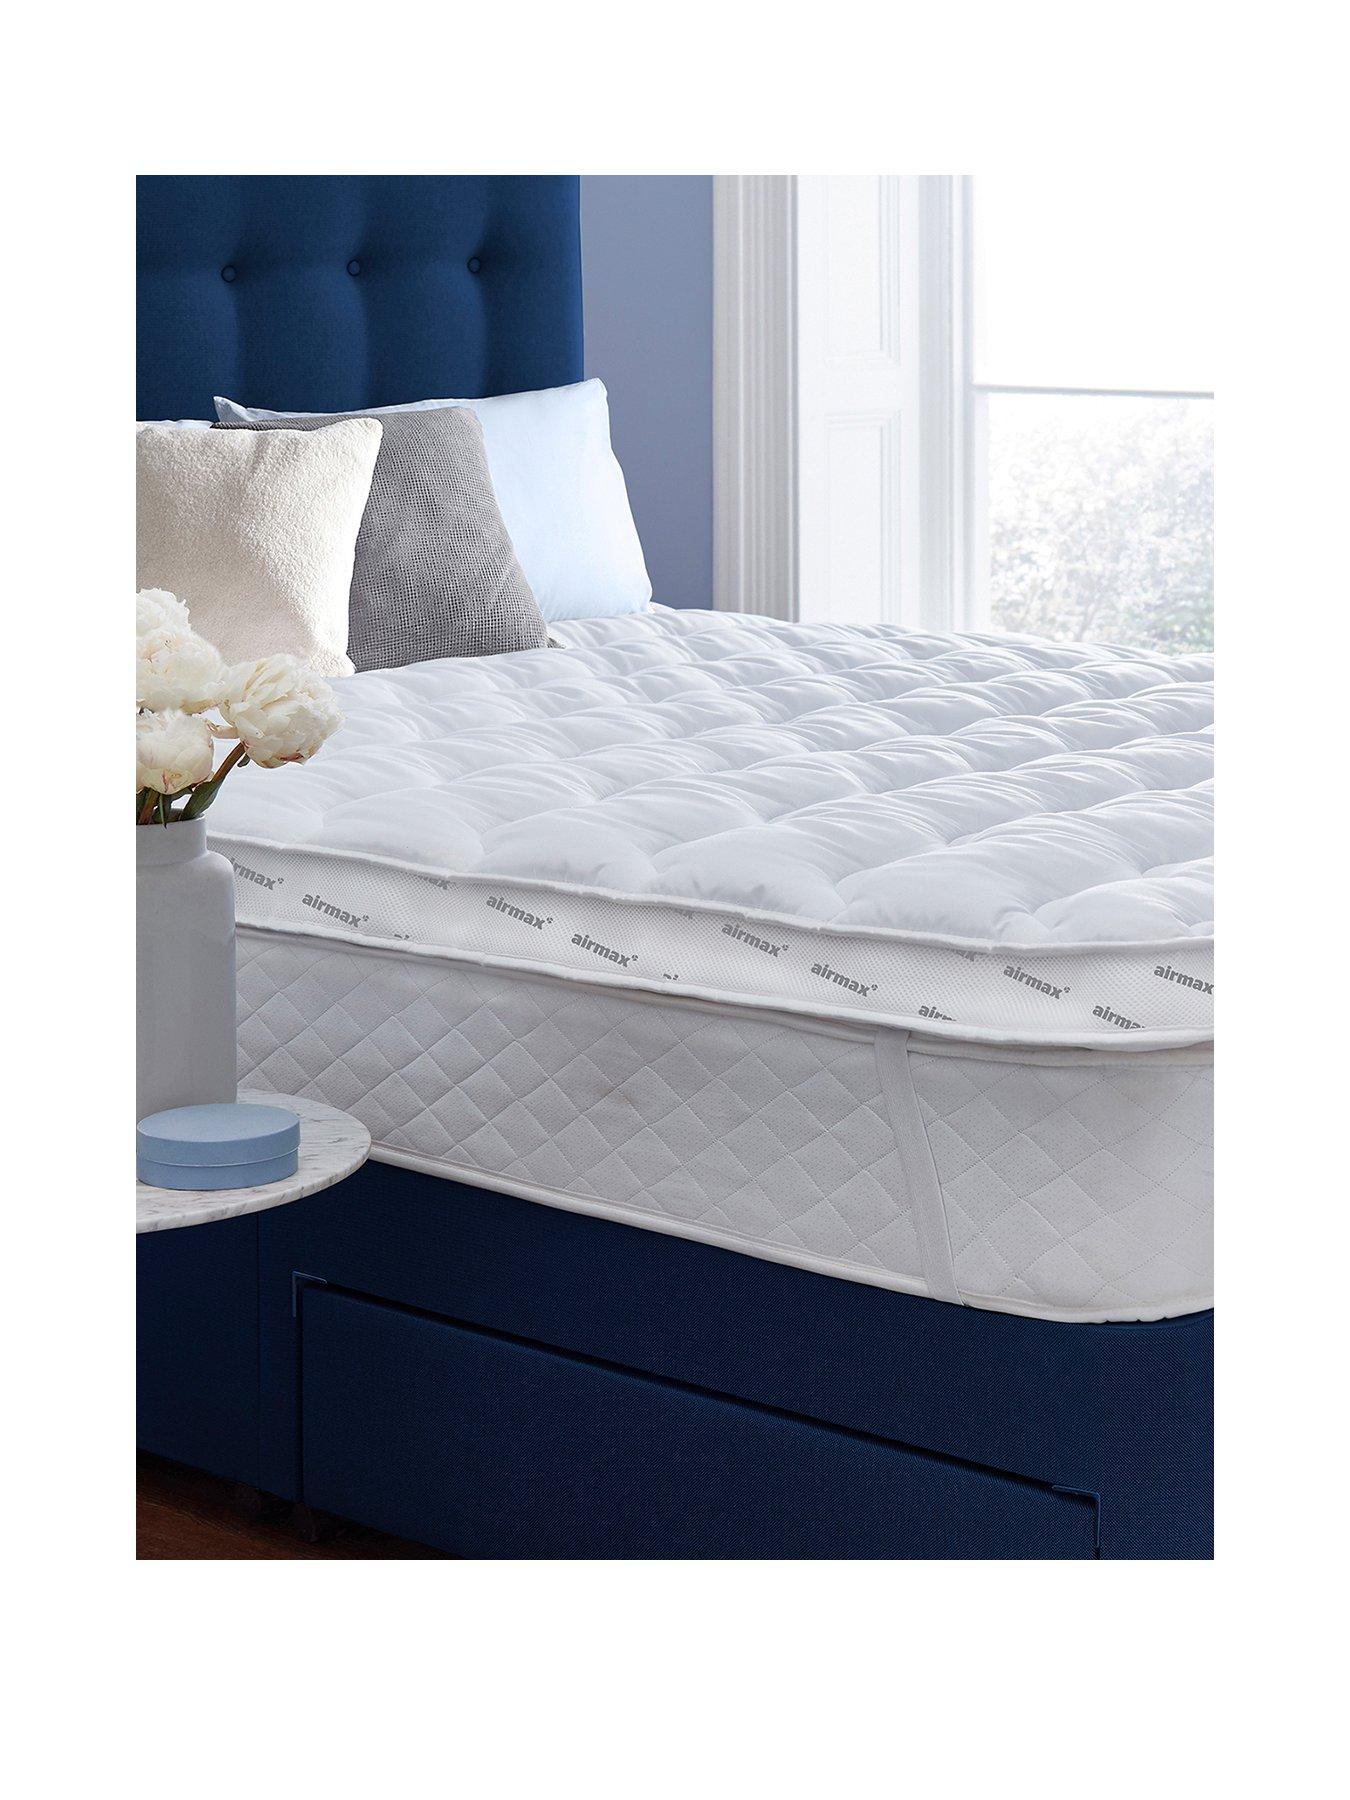 Topper Stopper® Original - Non-Slip for Toppers and Mattresses